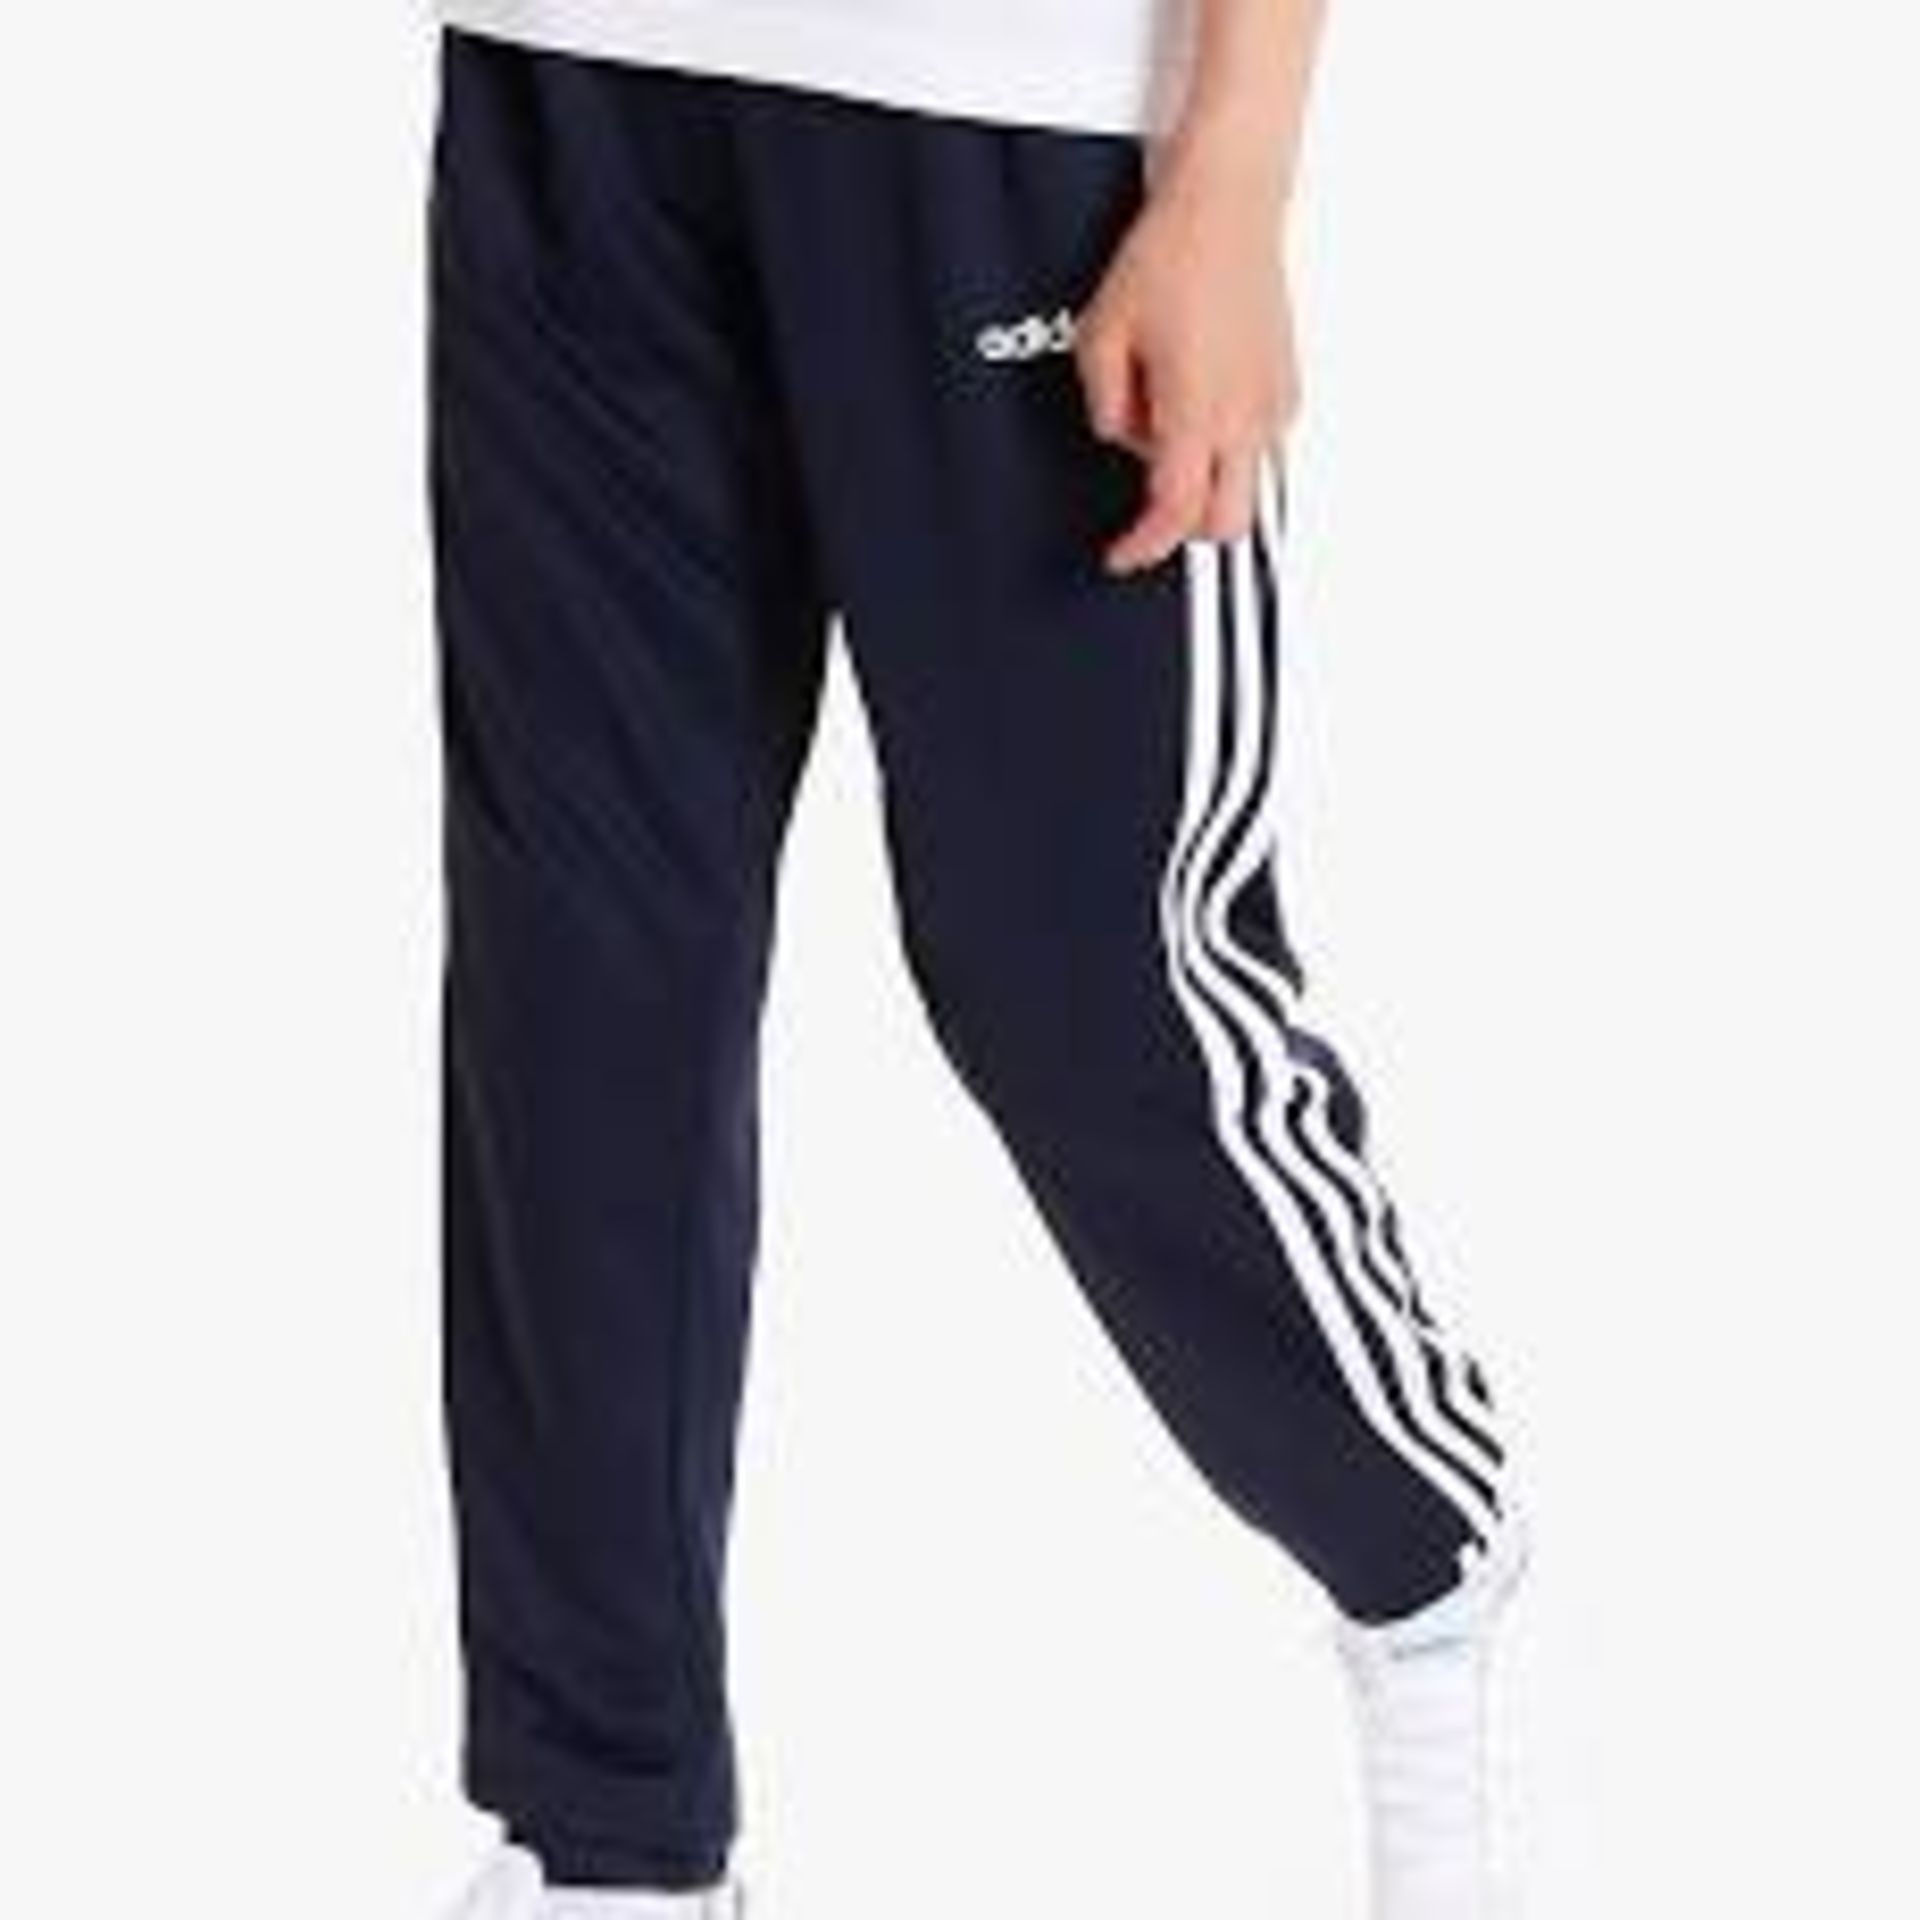 Assorted Items To Include Adidas Age 9-10 Years Shorts, Adidas Age 13-14 Navy Jogging Bottoms,